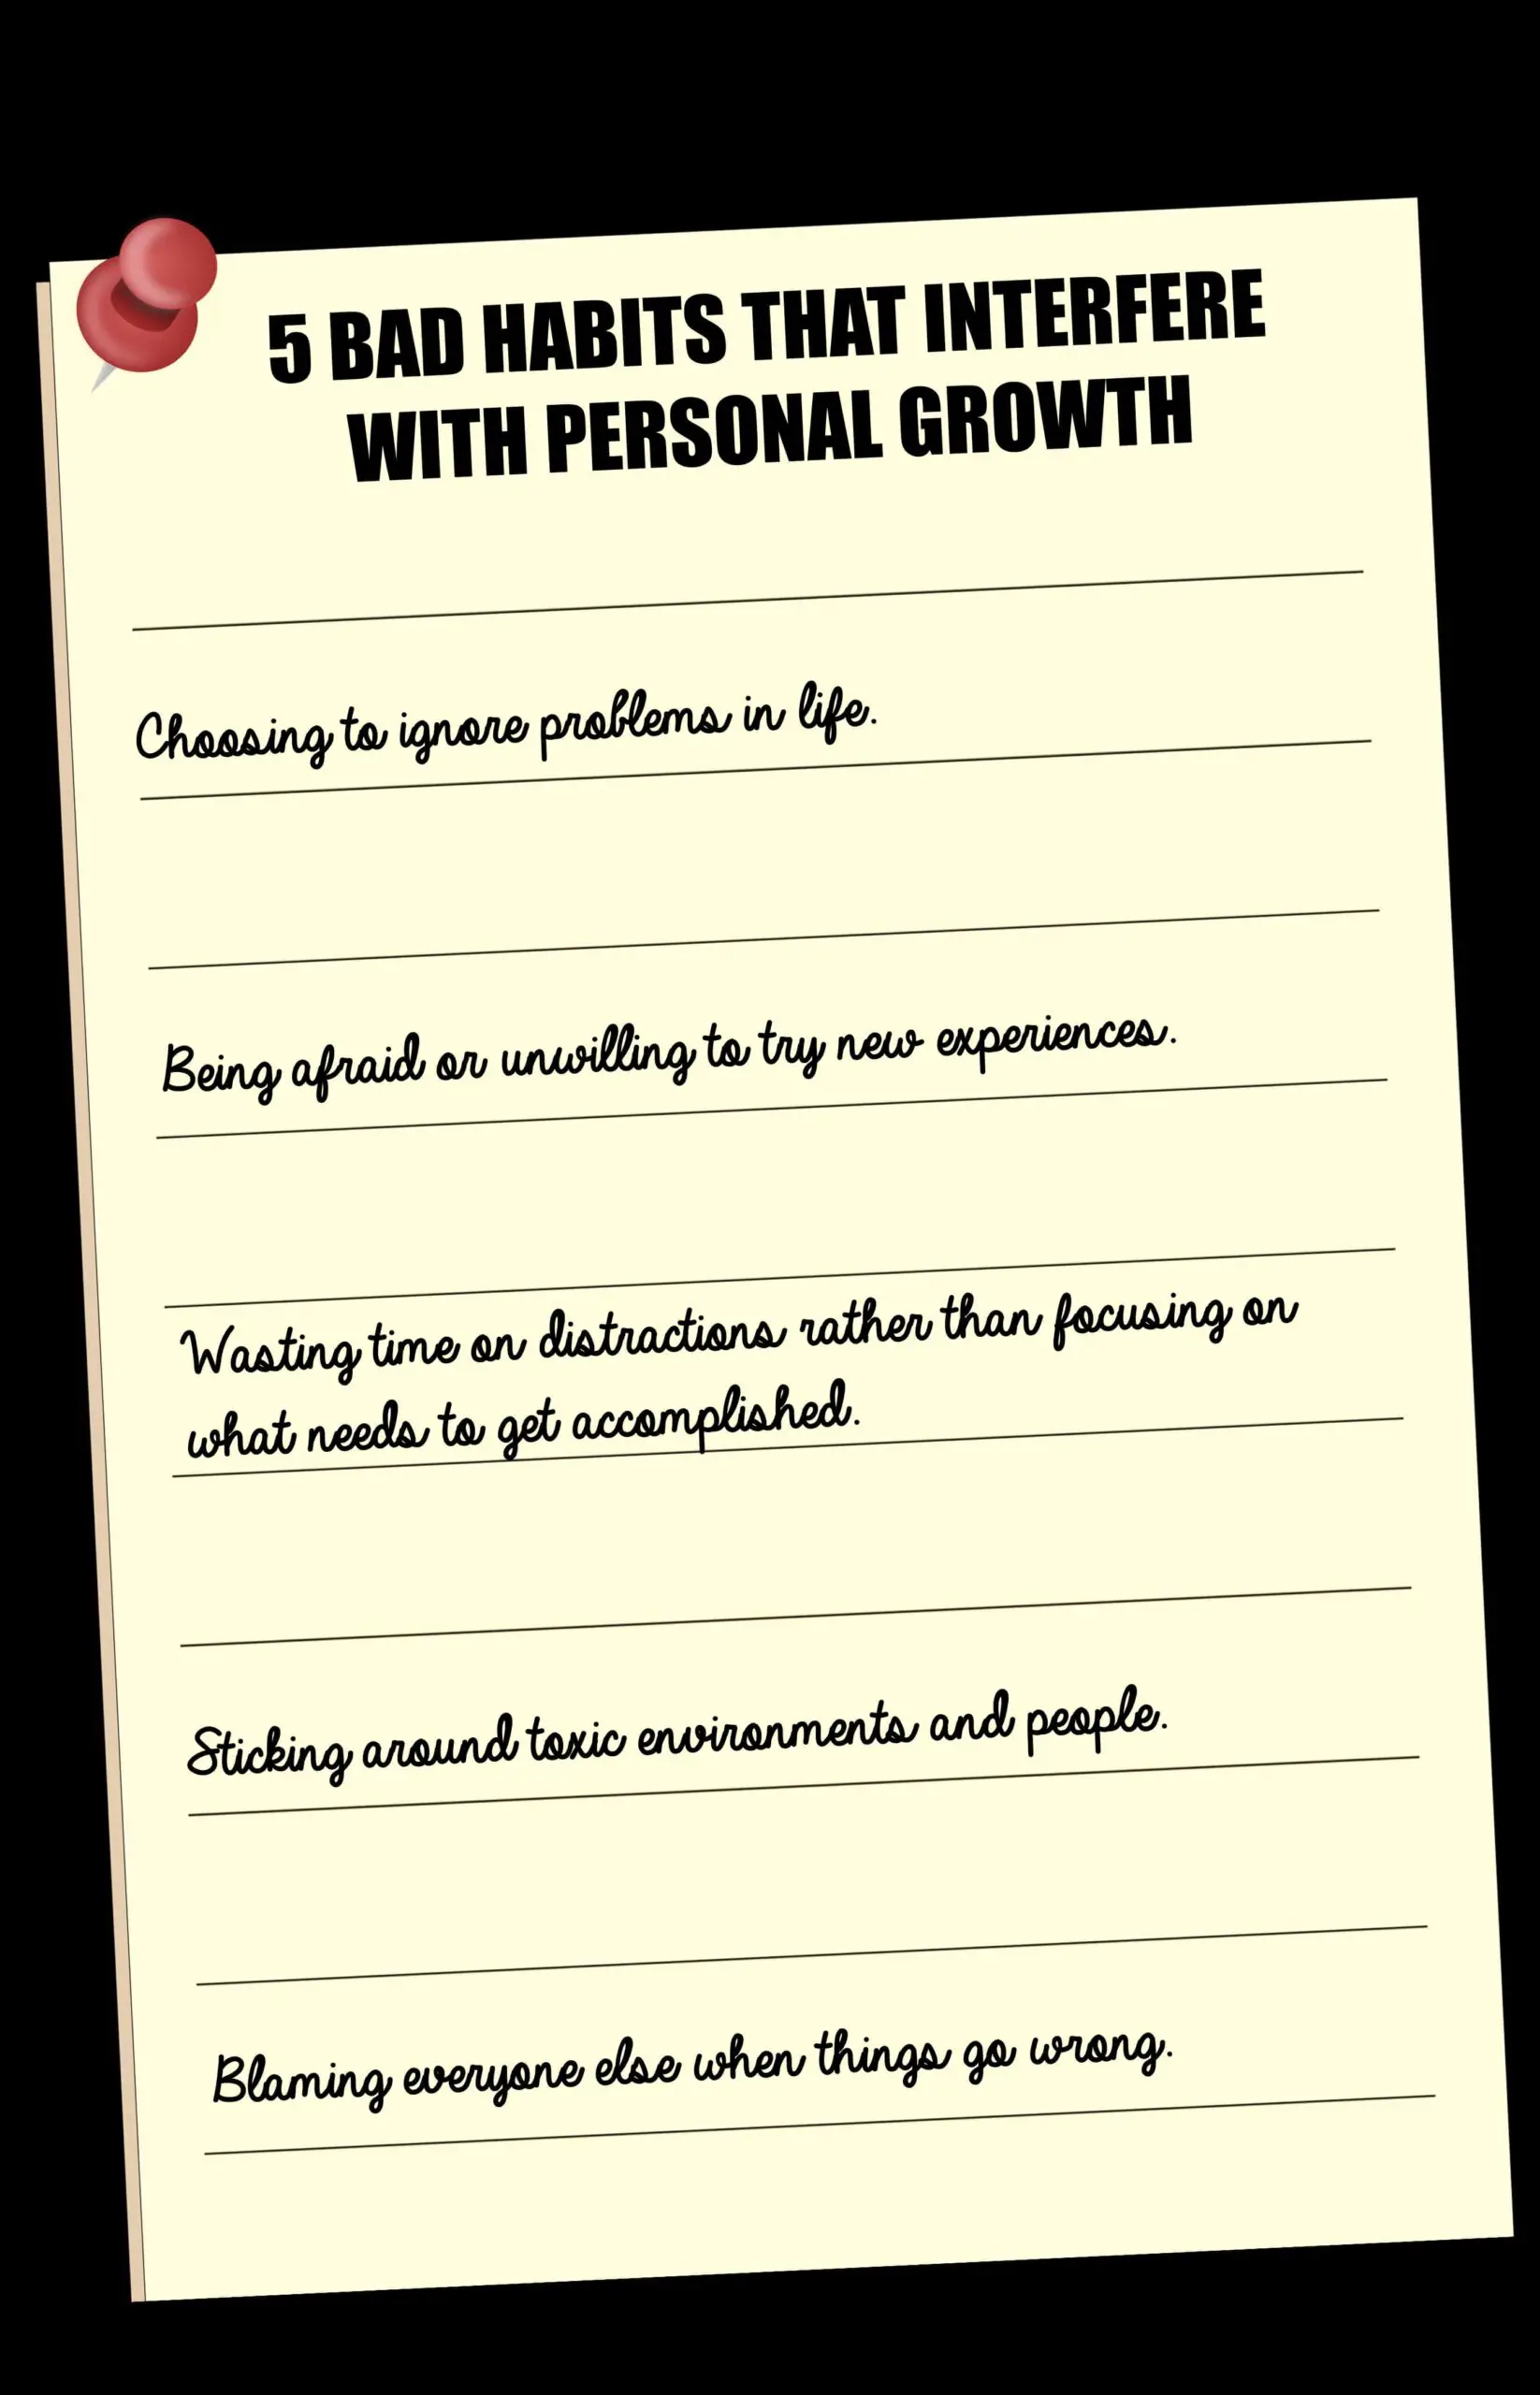 habits that interfere with personal growth